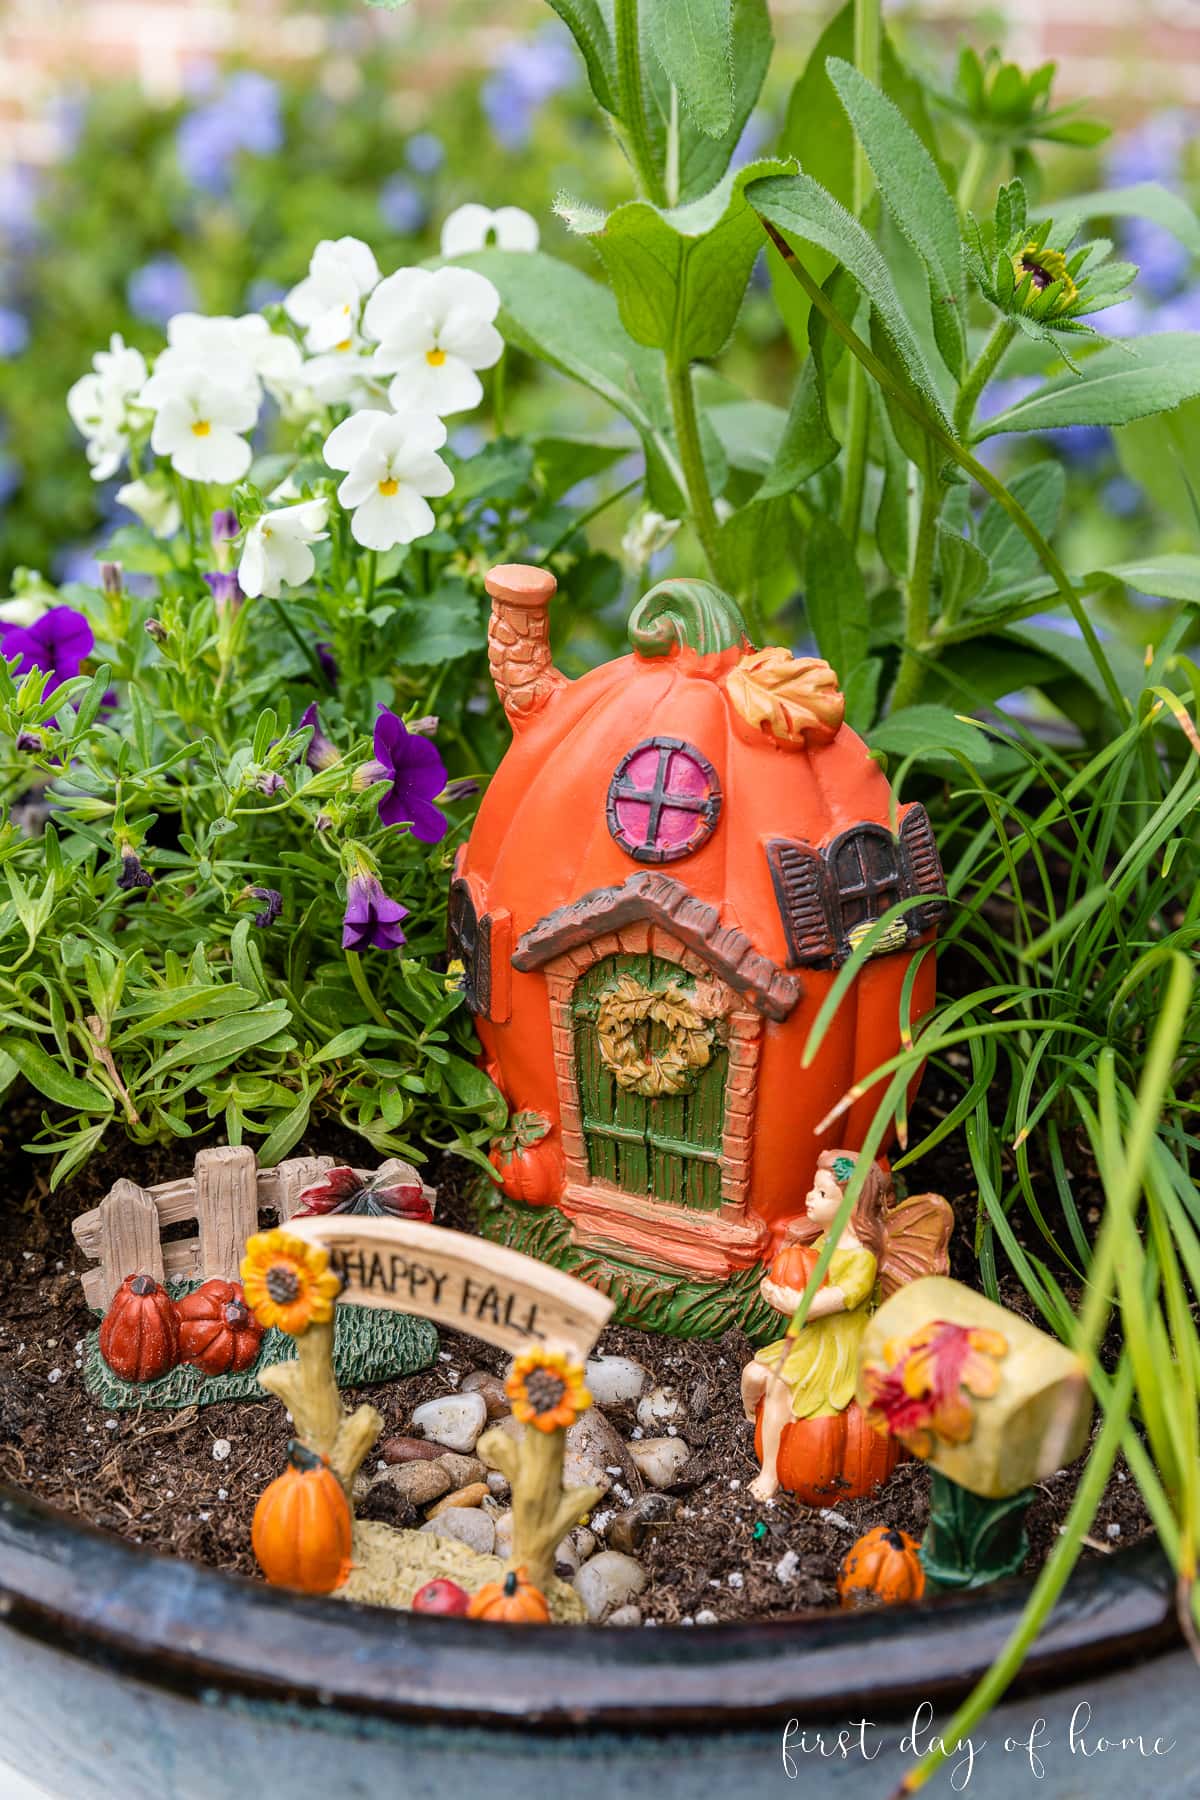 Fall fairy garden closeup view of pumpkin house and archway that reads "Happy Fall"